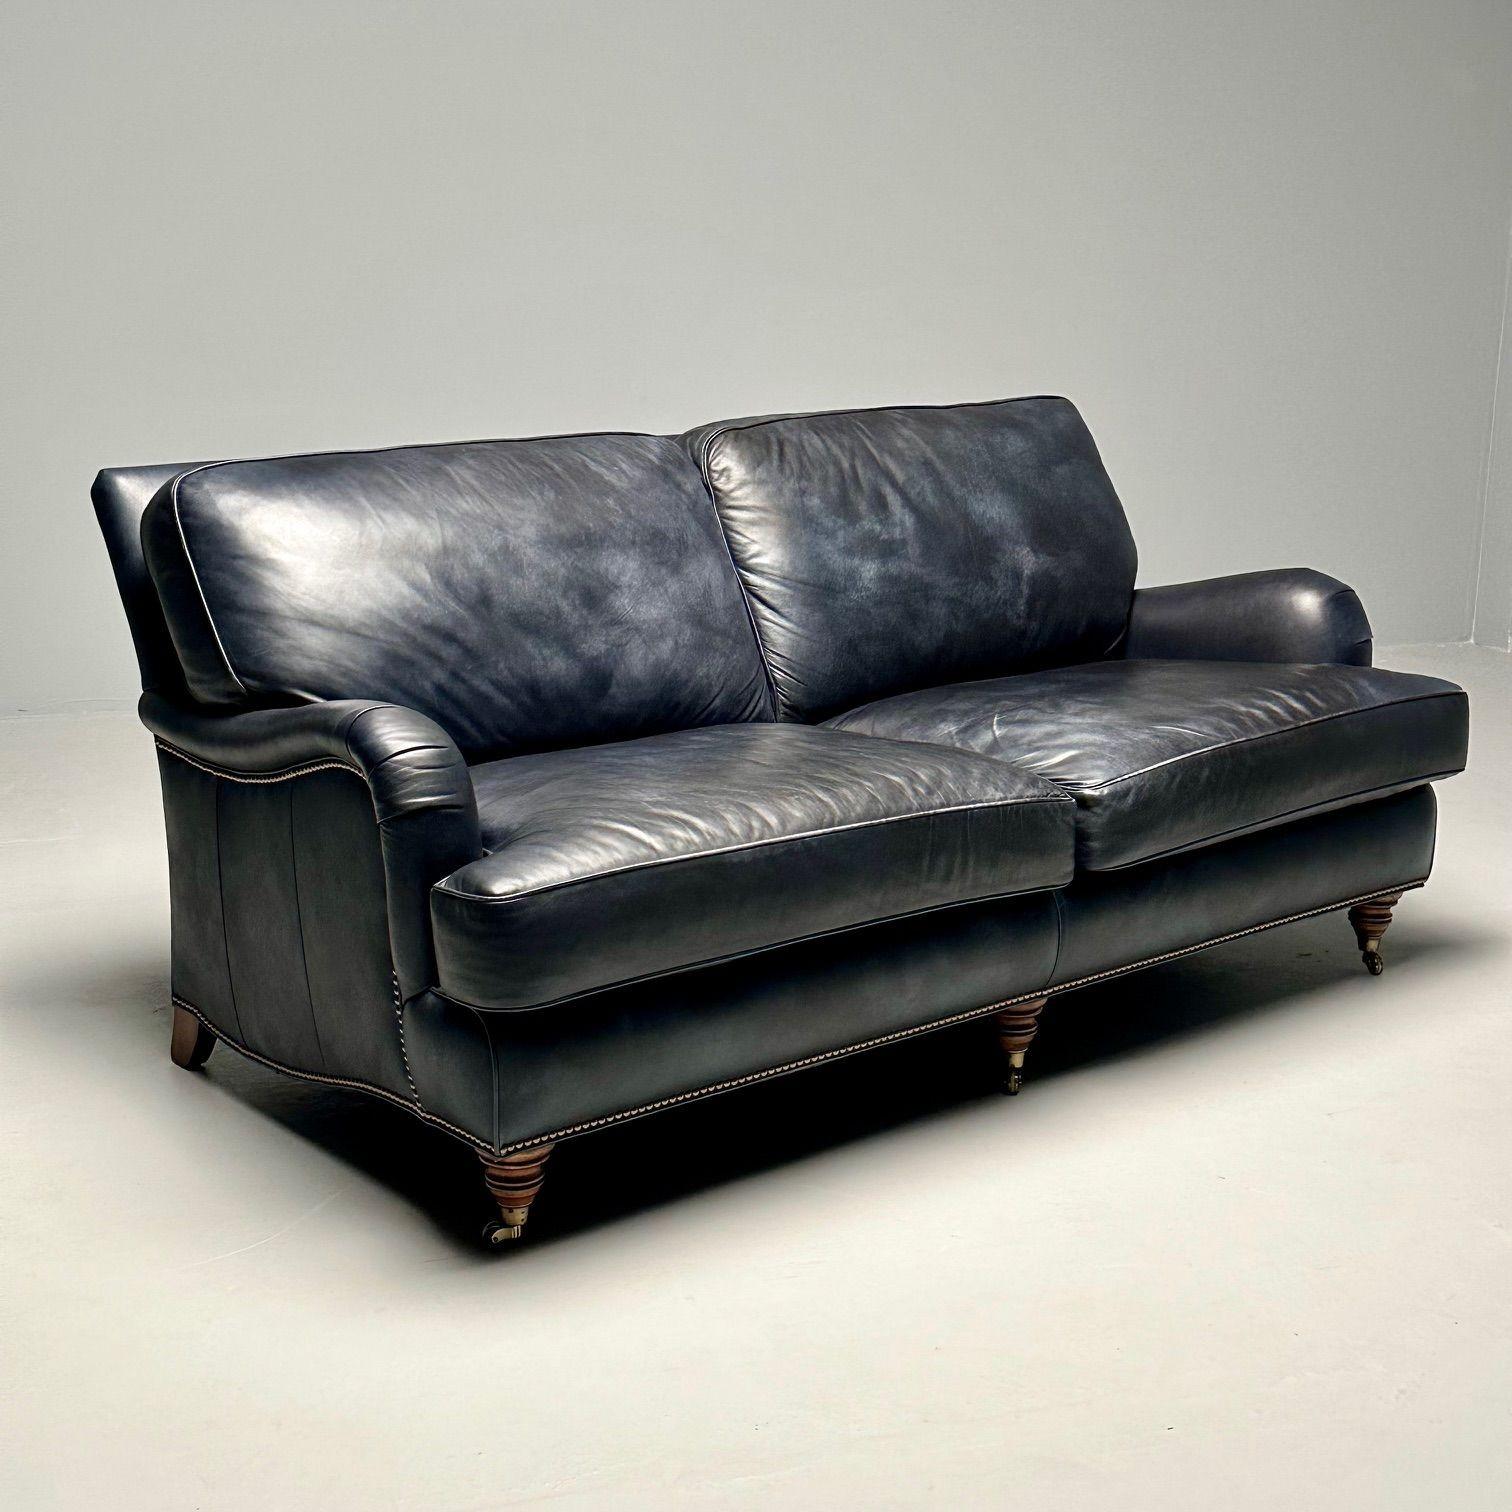 Hancock and Moore, Georgian Scroll Arm Sofa, Dark Blue Distressed Leather, 2000s For Sale 11